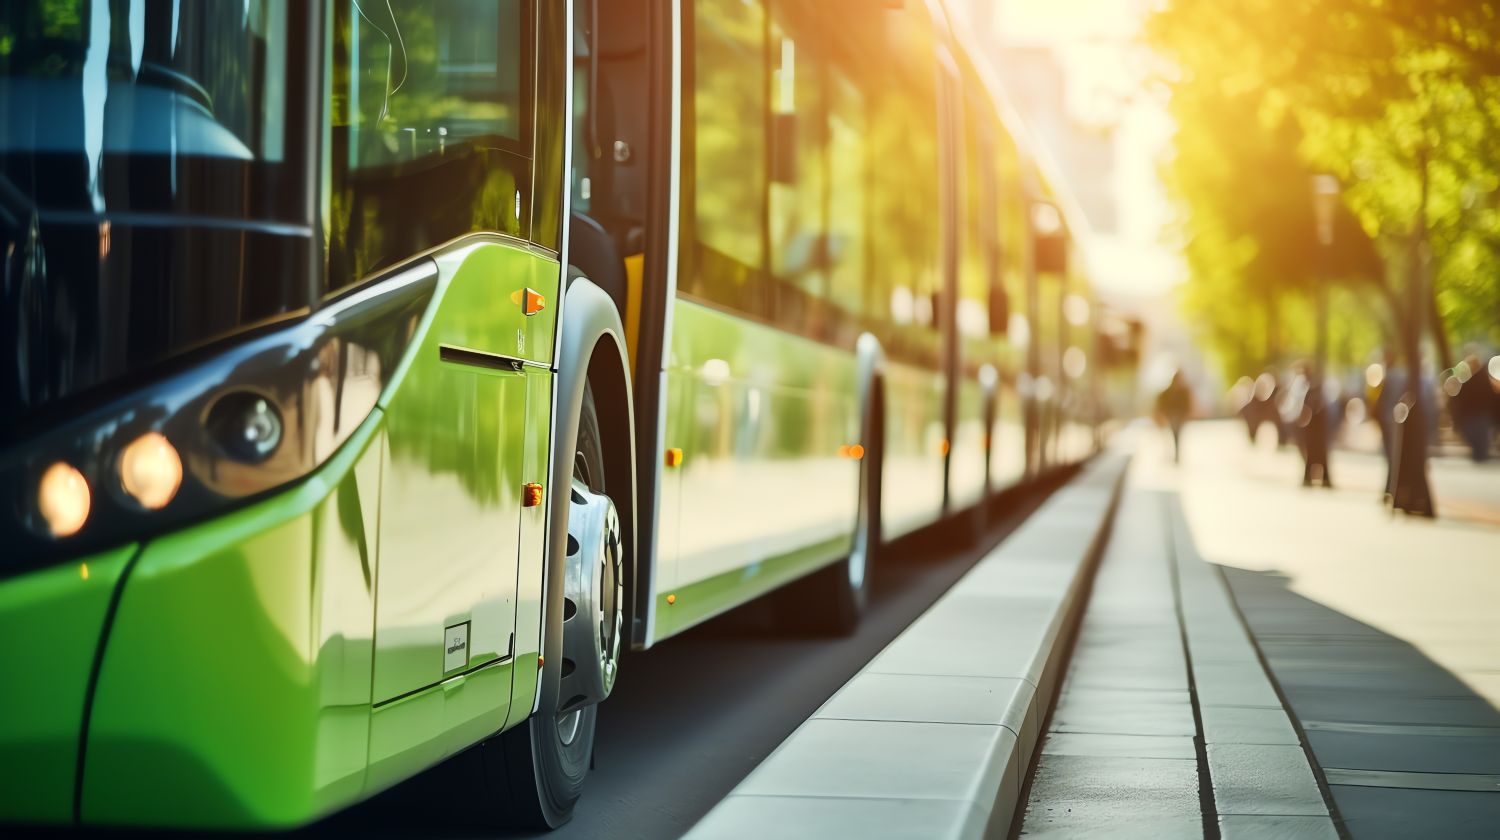 Image of green buses parked on the street